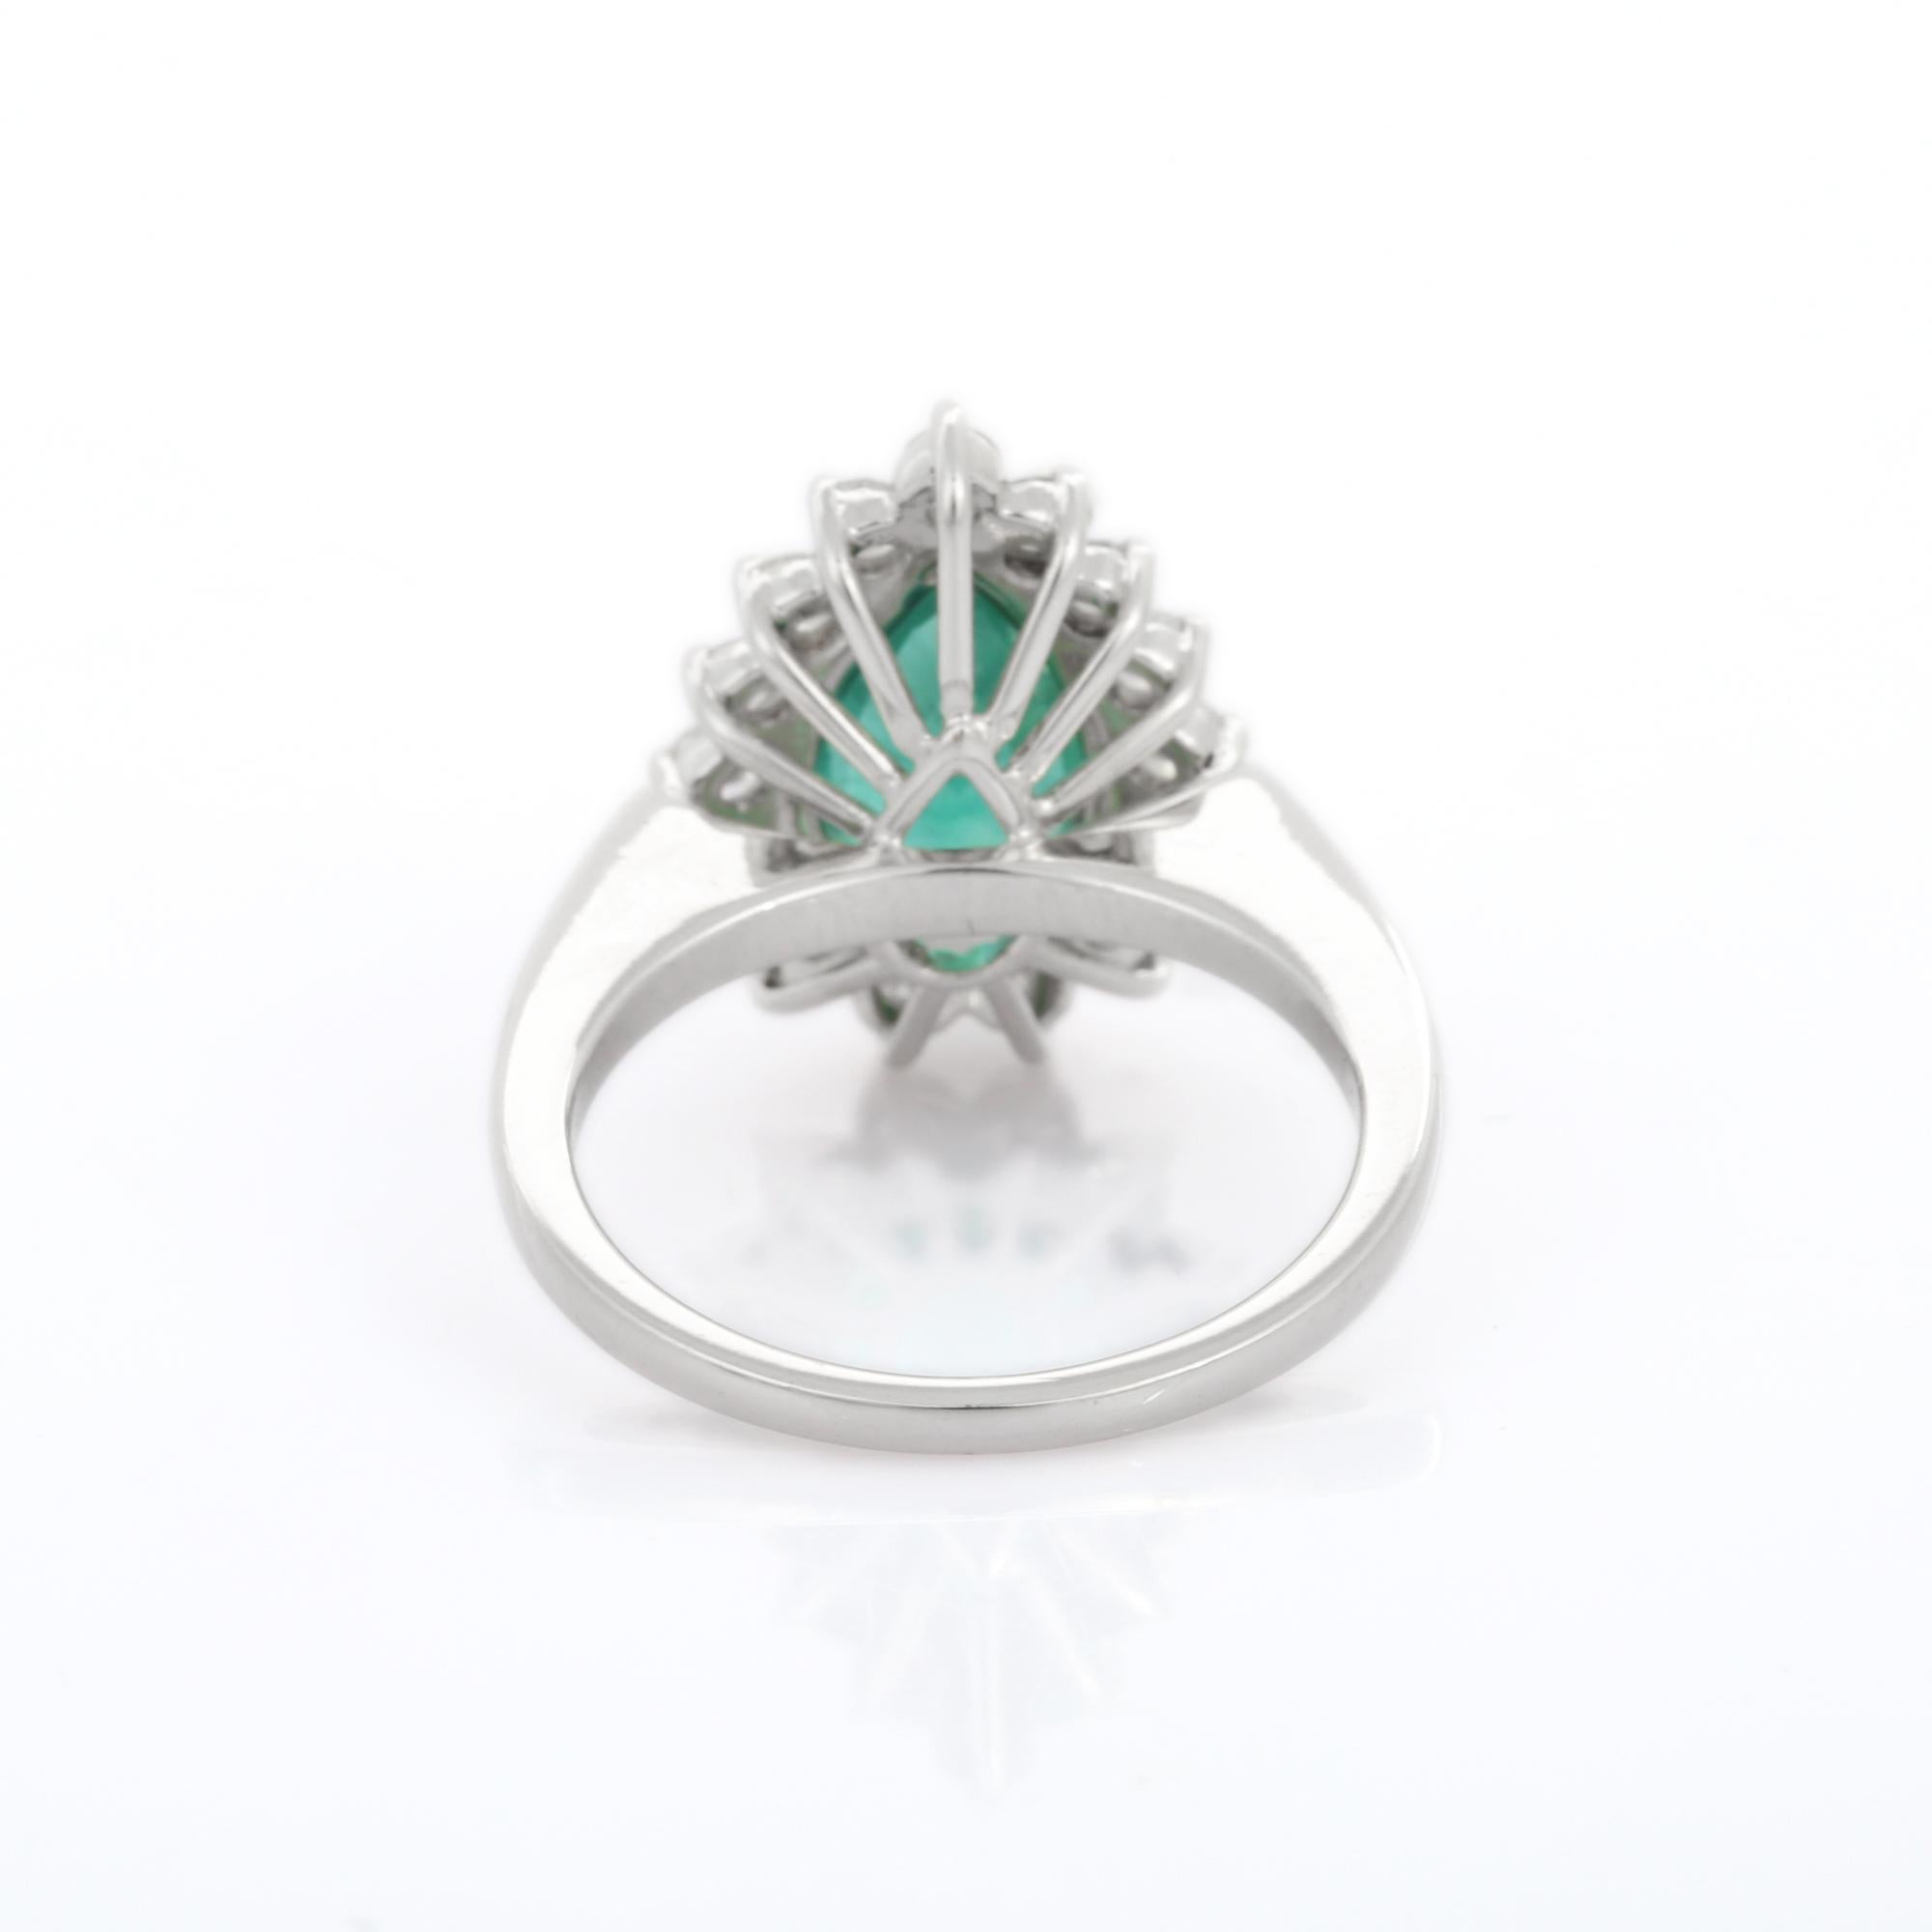 For Sale:  Statement 18k Solid White Gold Pear Emerald Halo Wedding Ring with Diamonds 5